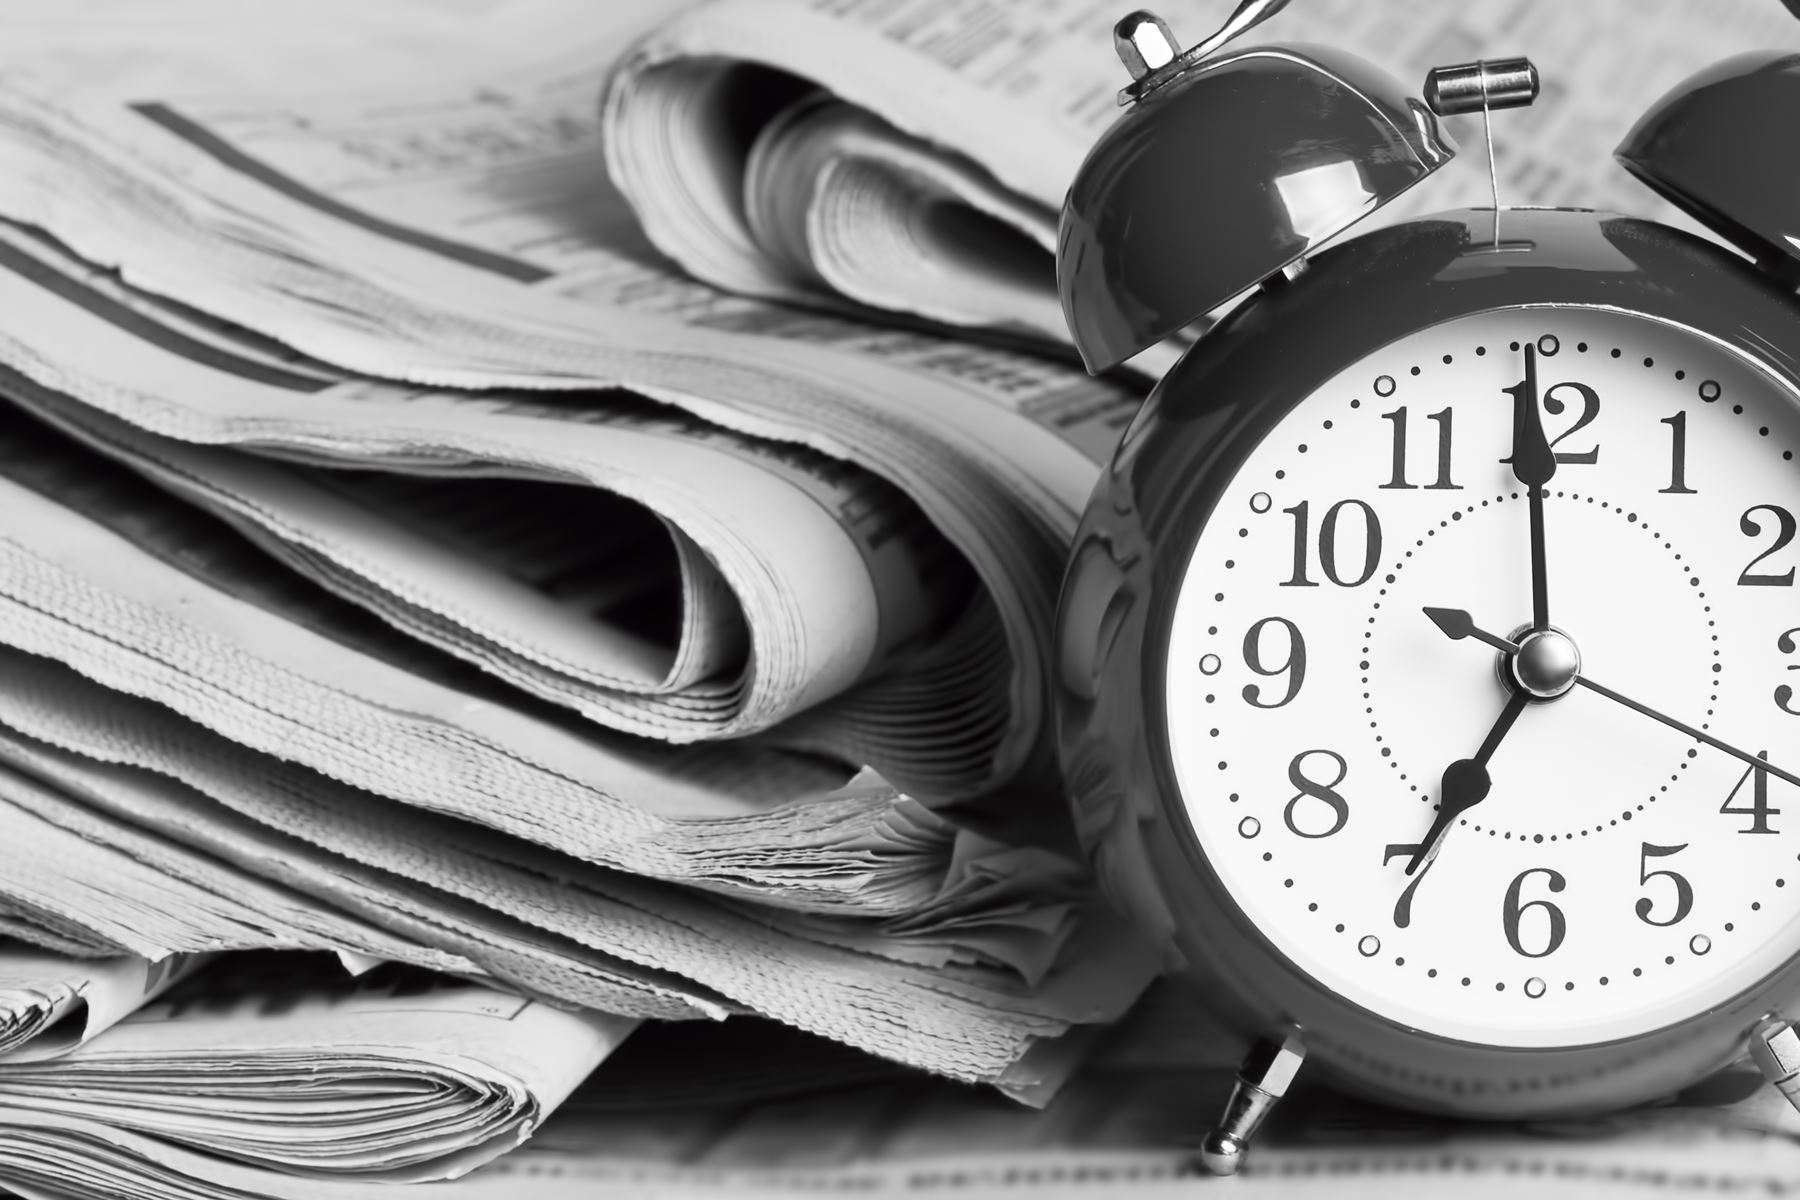 Stack of newspapers next to an analog alarm clock